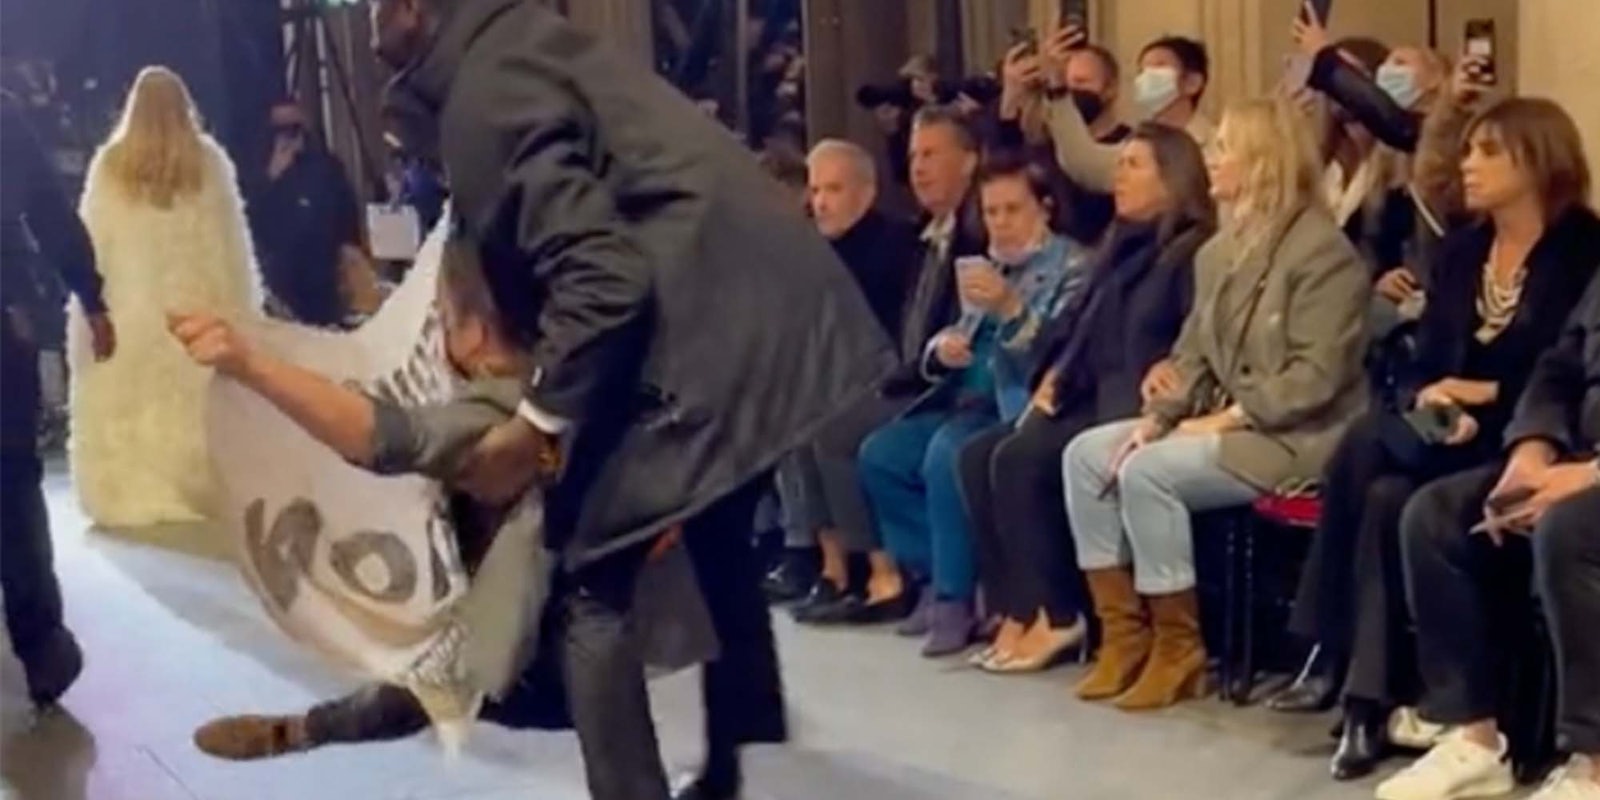 A protester that crashed the Louis Vuitton fashion show in Paris has become a big topic online.